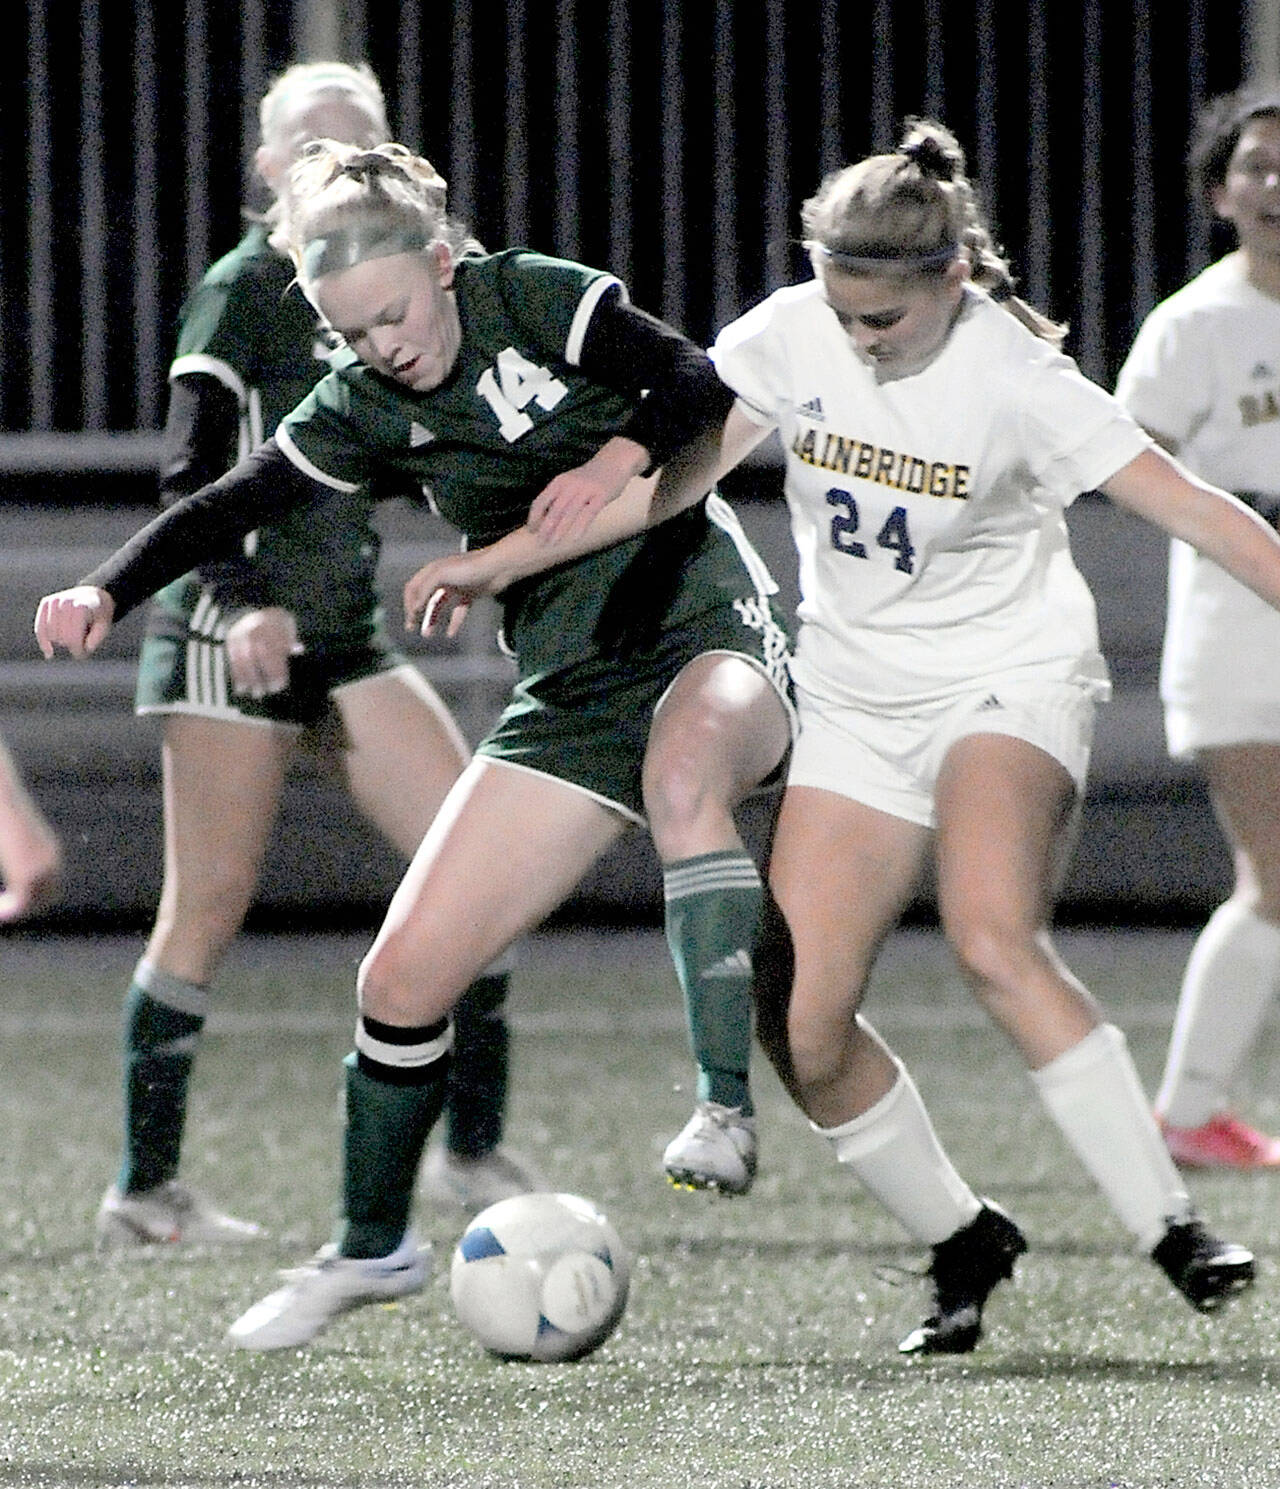 Port Angeles’ Anna Petty, left, fights for control with Bainbridge’s Grace Rich on Tuesday at Peninsula College. (Keith Thorpe/Peninsula Daily News)